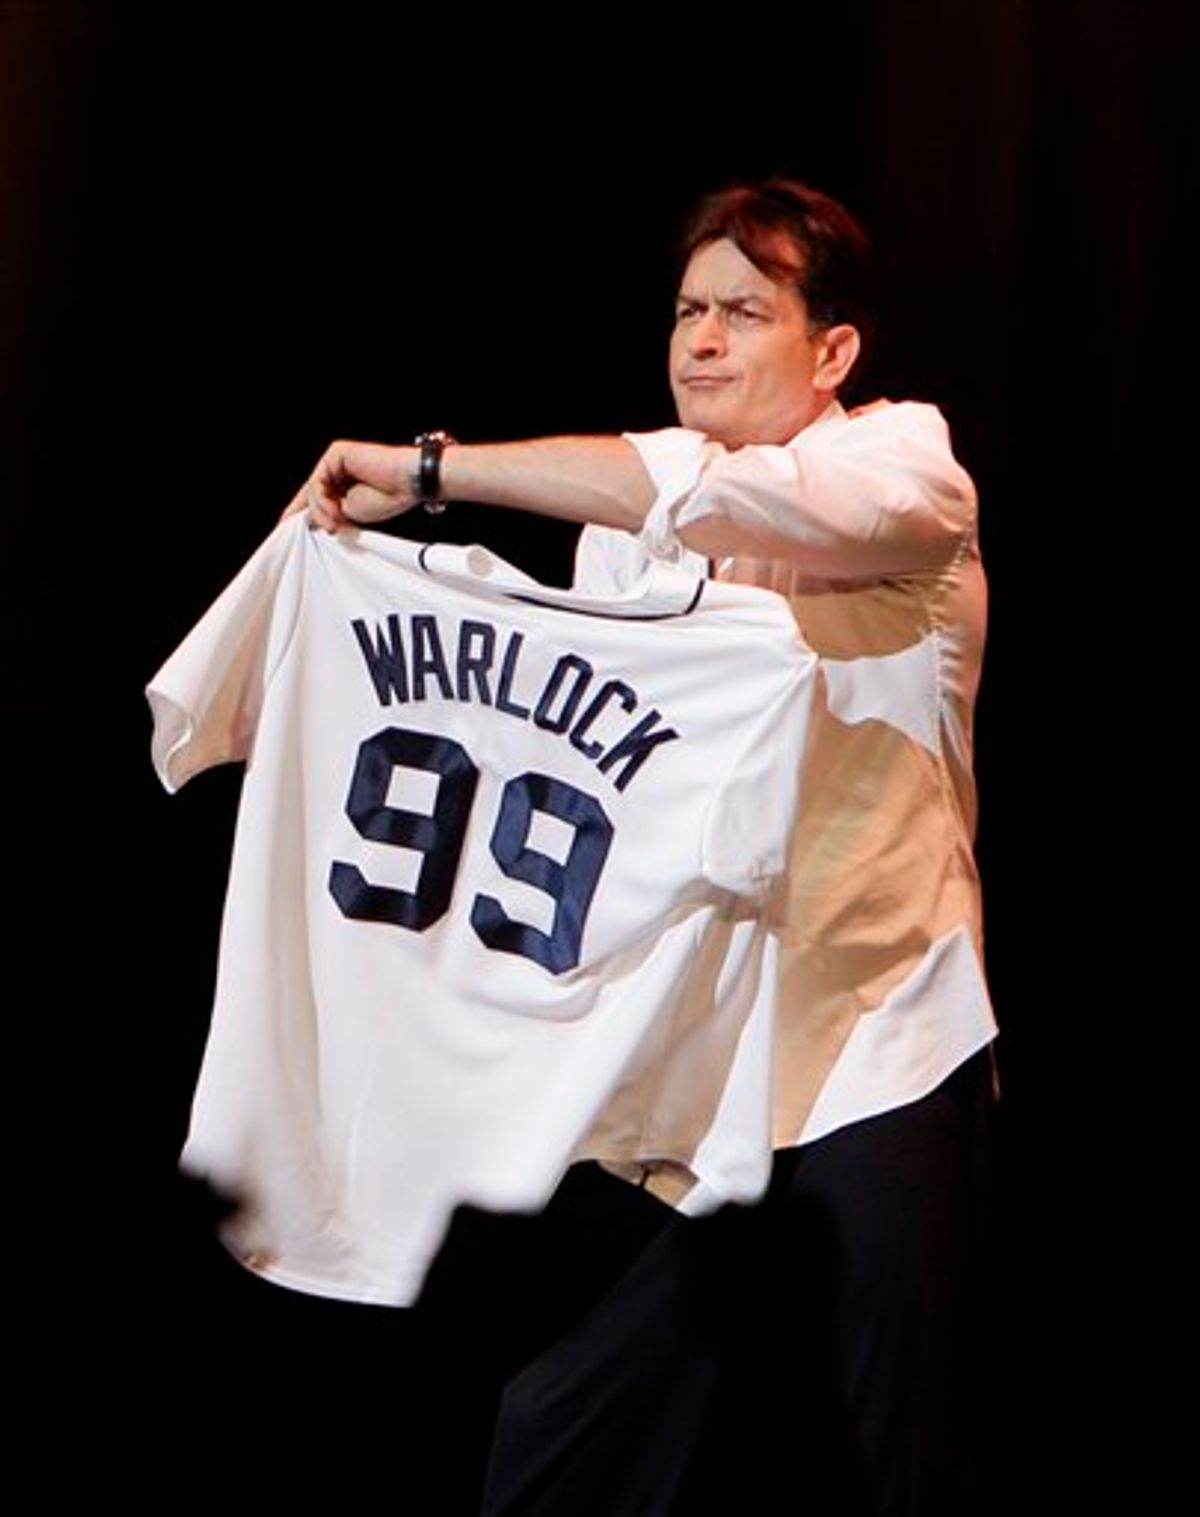 Actor Charlie Sheen shows off his Detroit Tigers jersey during his performance at the Fox Theatre in Detroit, Saturday, April 2, 2011. Promising "the real story," the 45-year-old former "Two and a Half Men" star hit the road for a month-long, 20-city variety show tour, with the first stop Saturday's sold-out show in Detroit. (AP Photo/Carlos Osorio) (AP)